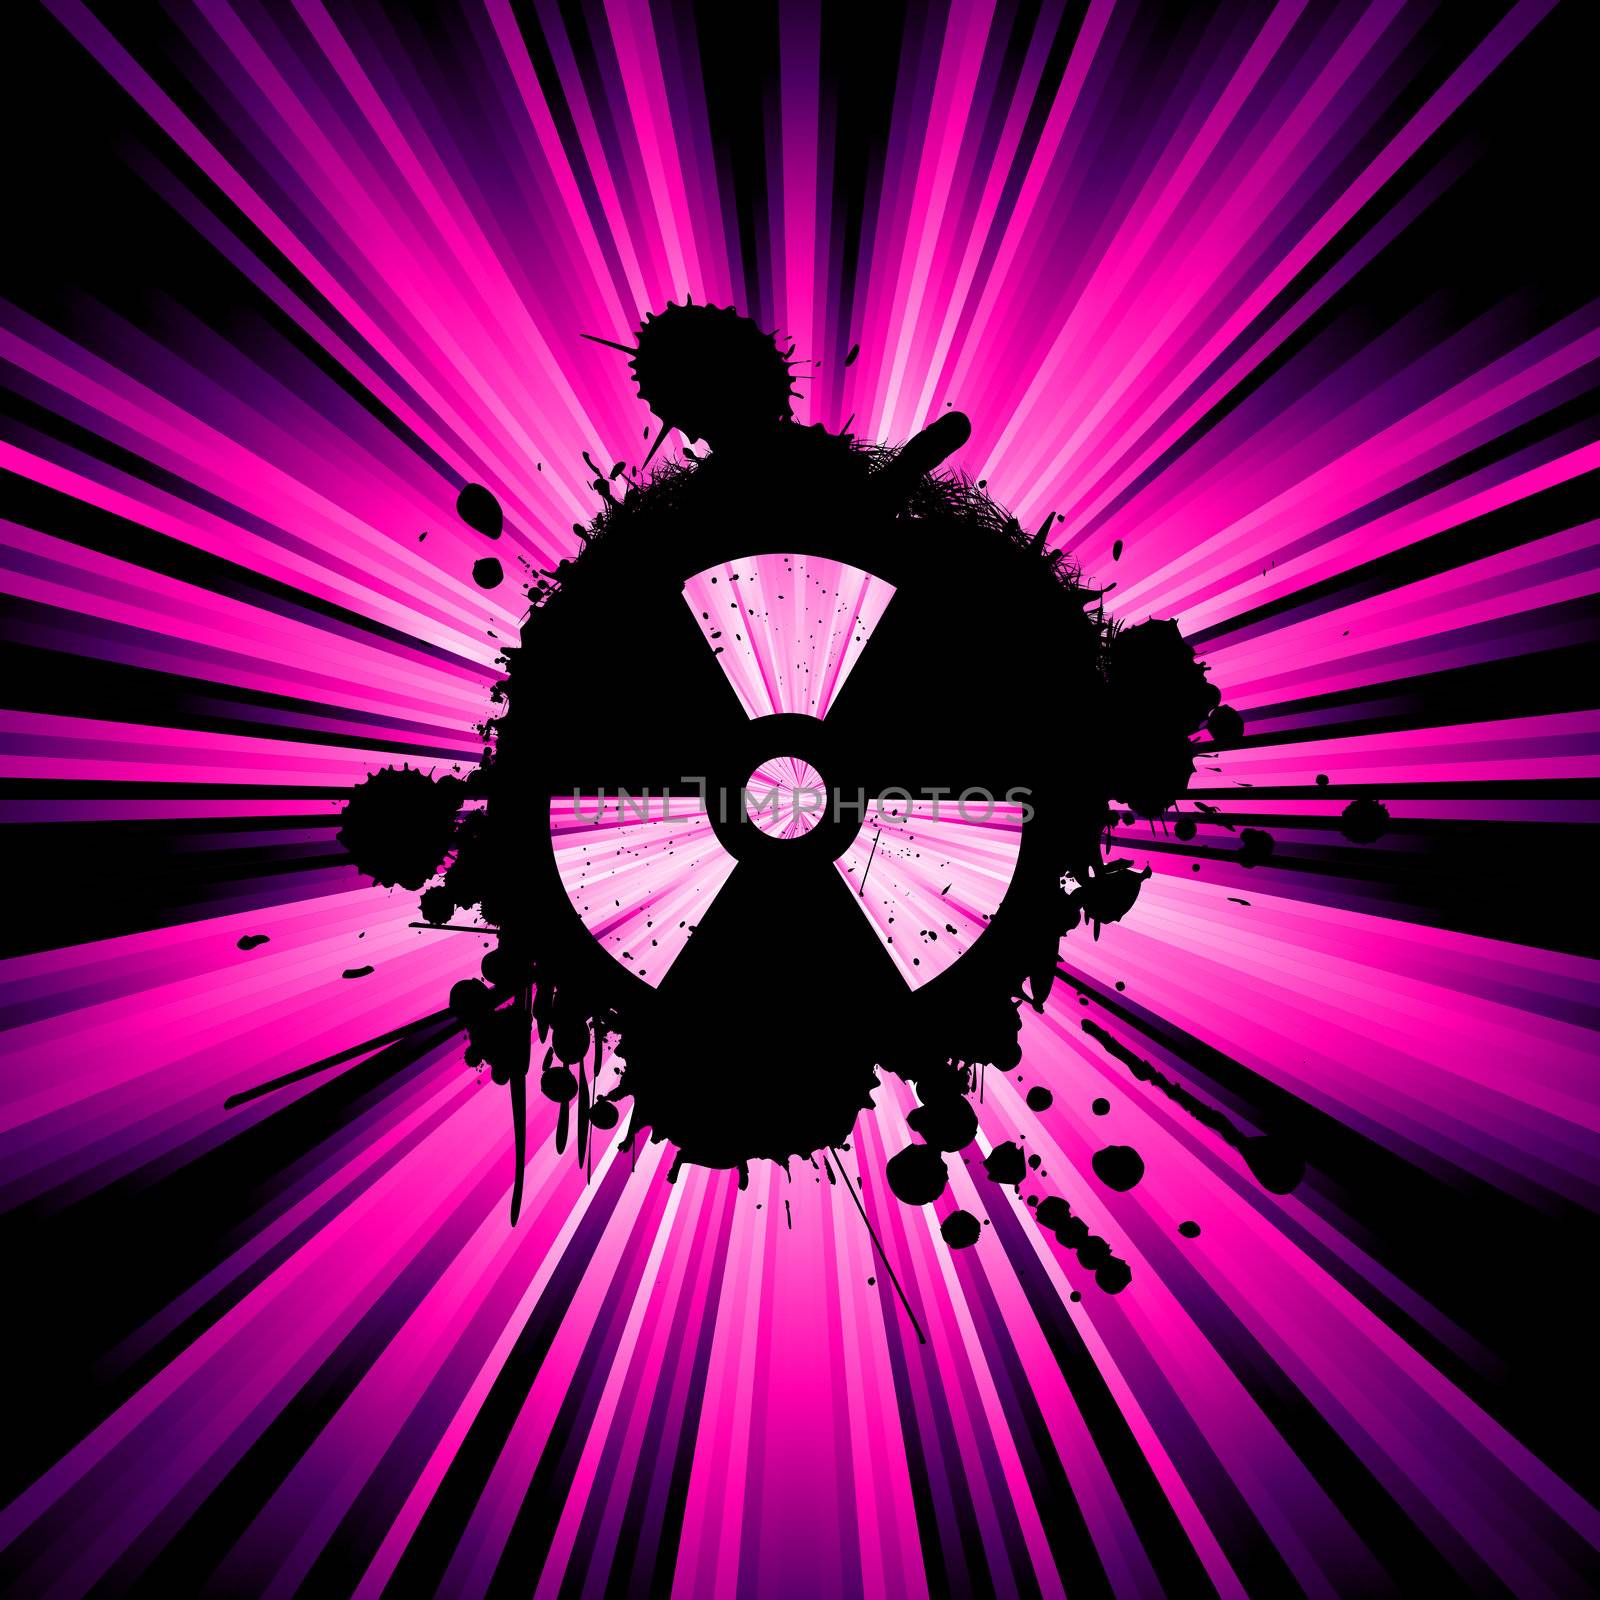 background with exploding rays nuclear hazard symbol